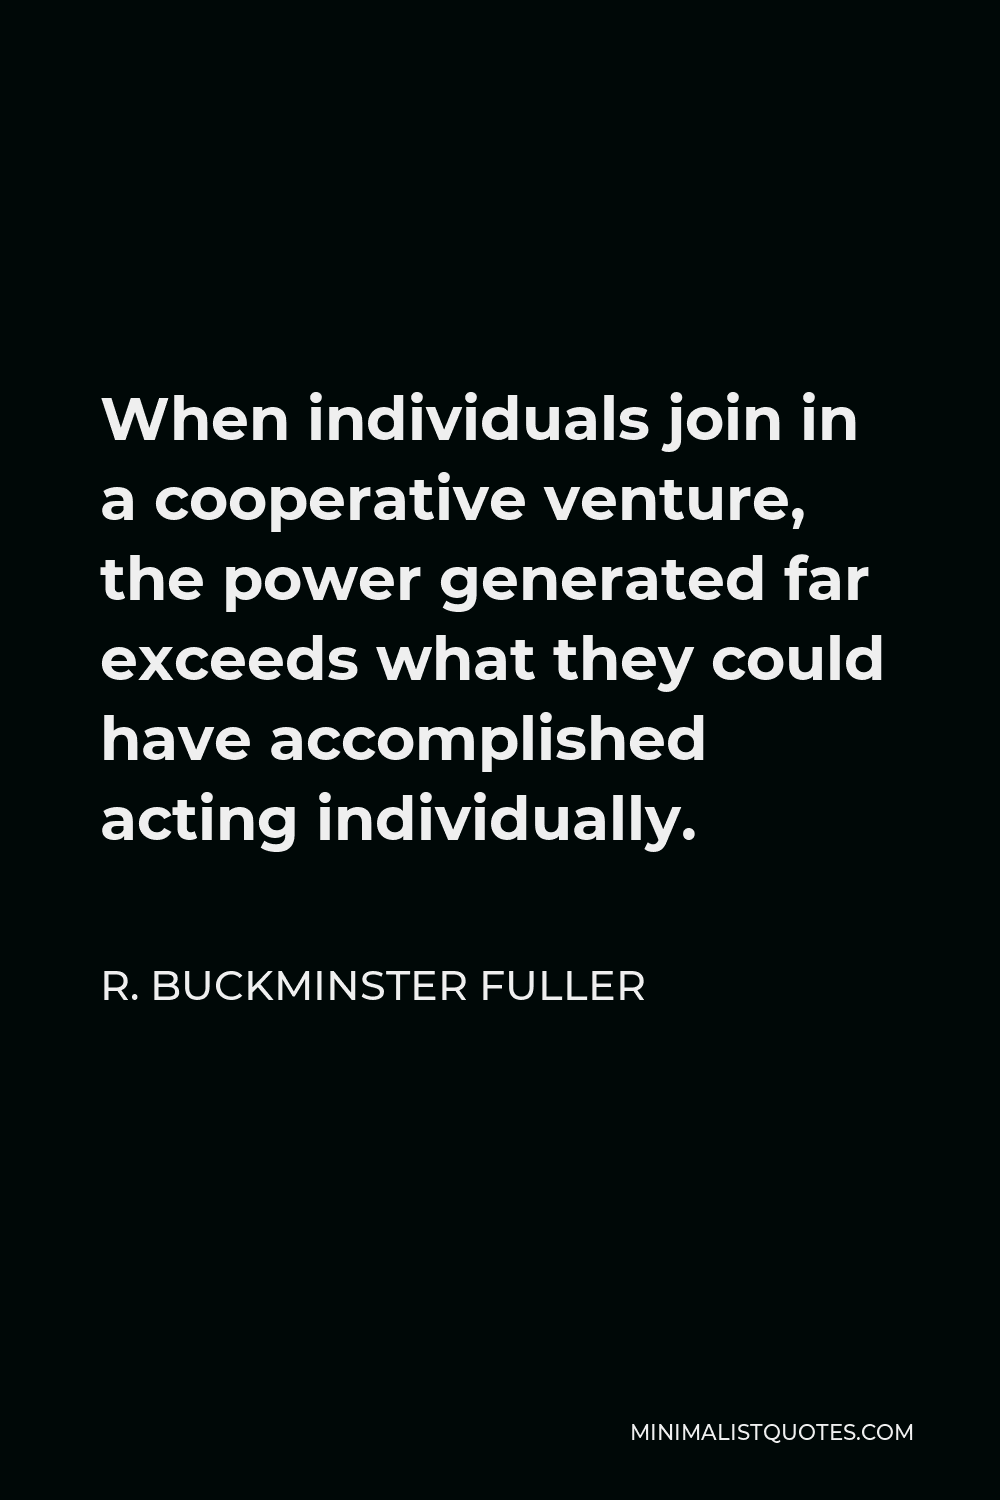 R. Buckminster Fuller Quote - When individuals join in a cooperative venture, the power generated far exceeds what they could have accomplished acting individually.